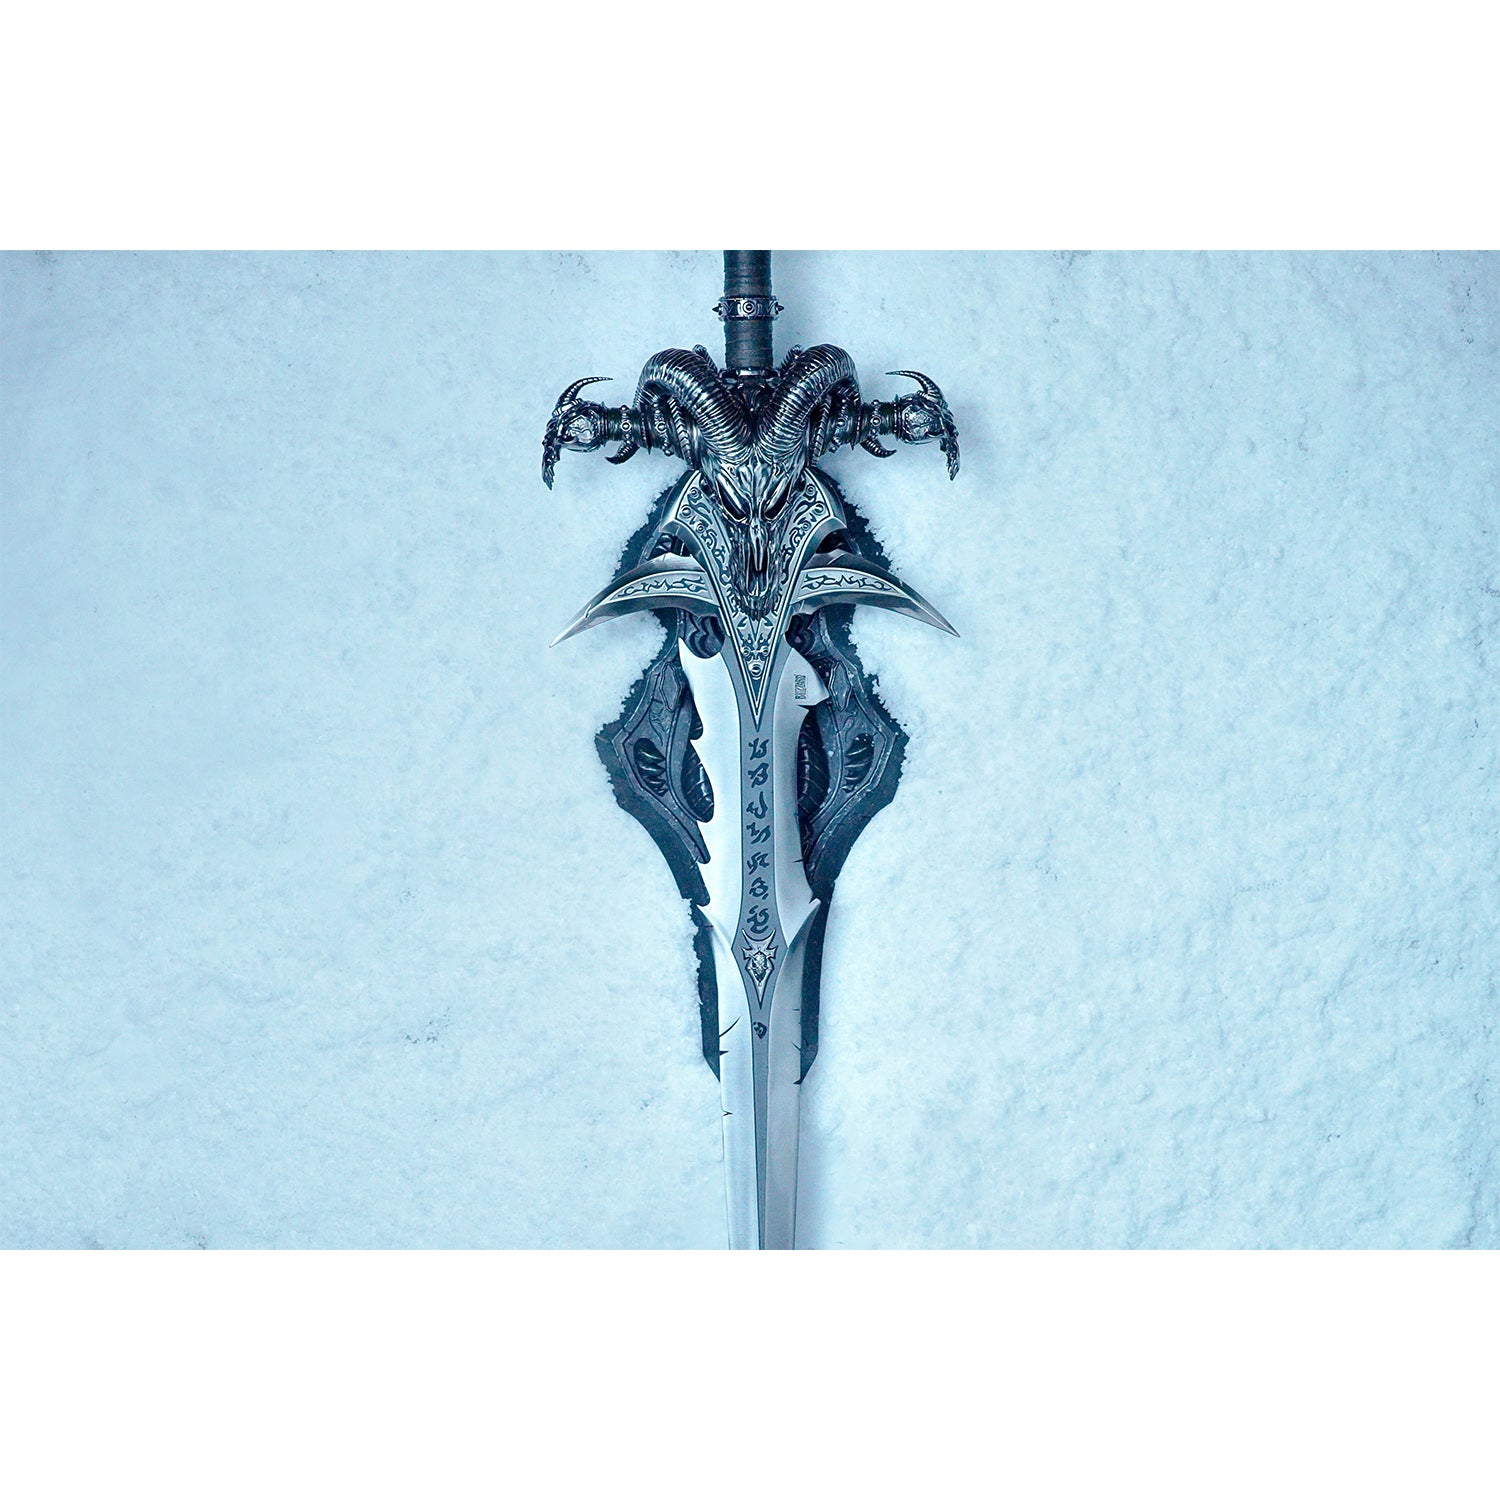 World of Warcraft Frostmourne Replica Wall Mount -Above View of Mount with Sword